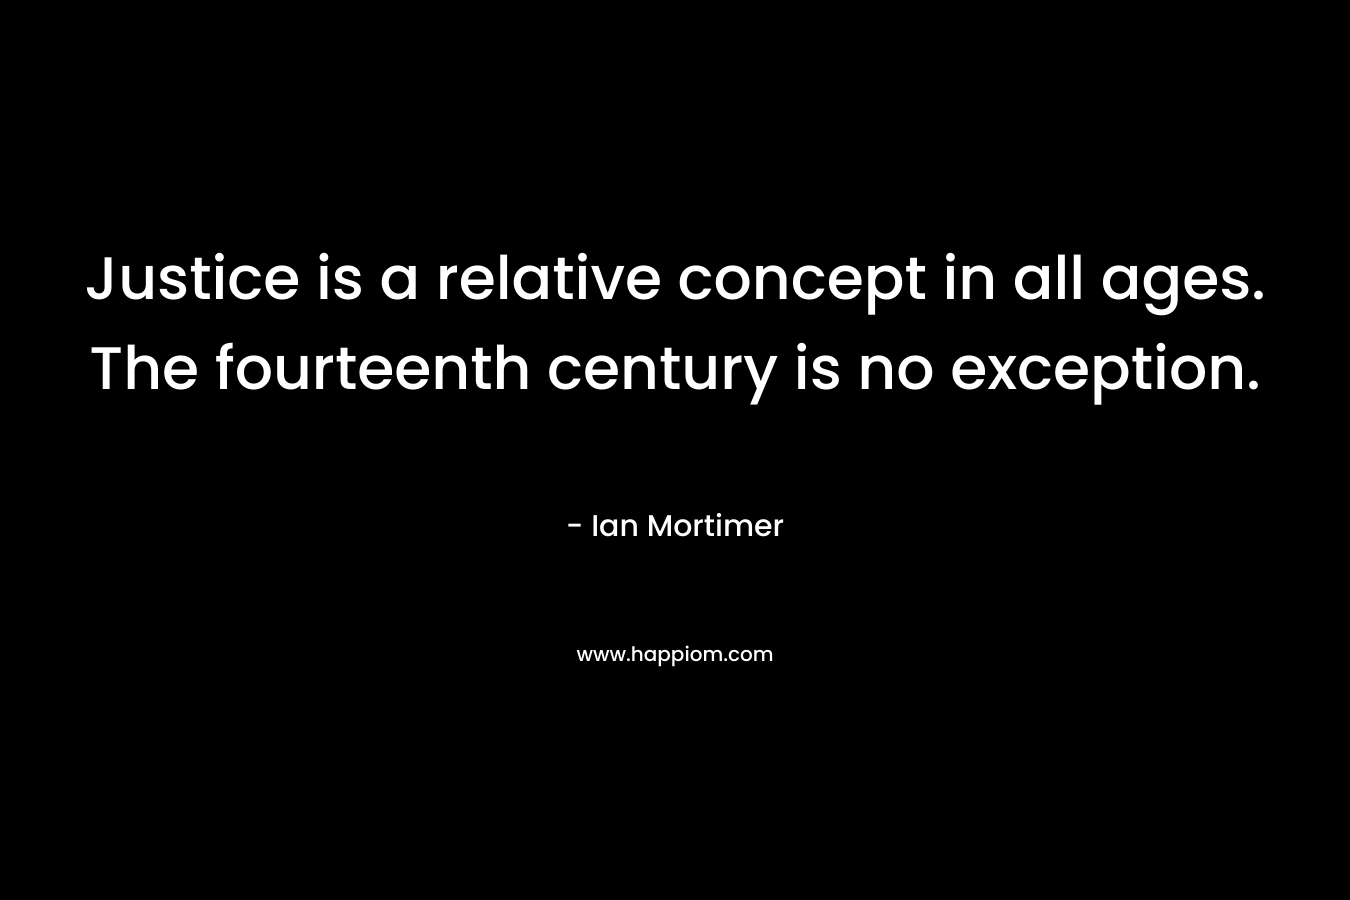 Justice is a relative concept in all ages. The fourteenth century is no exception. – Ian Mortimer